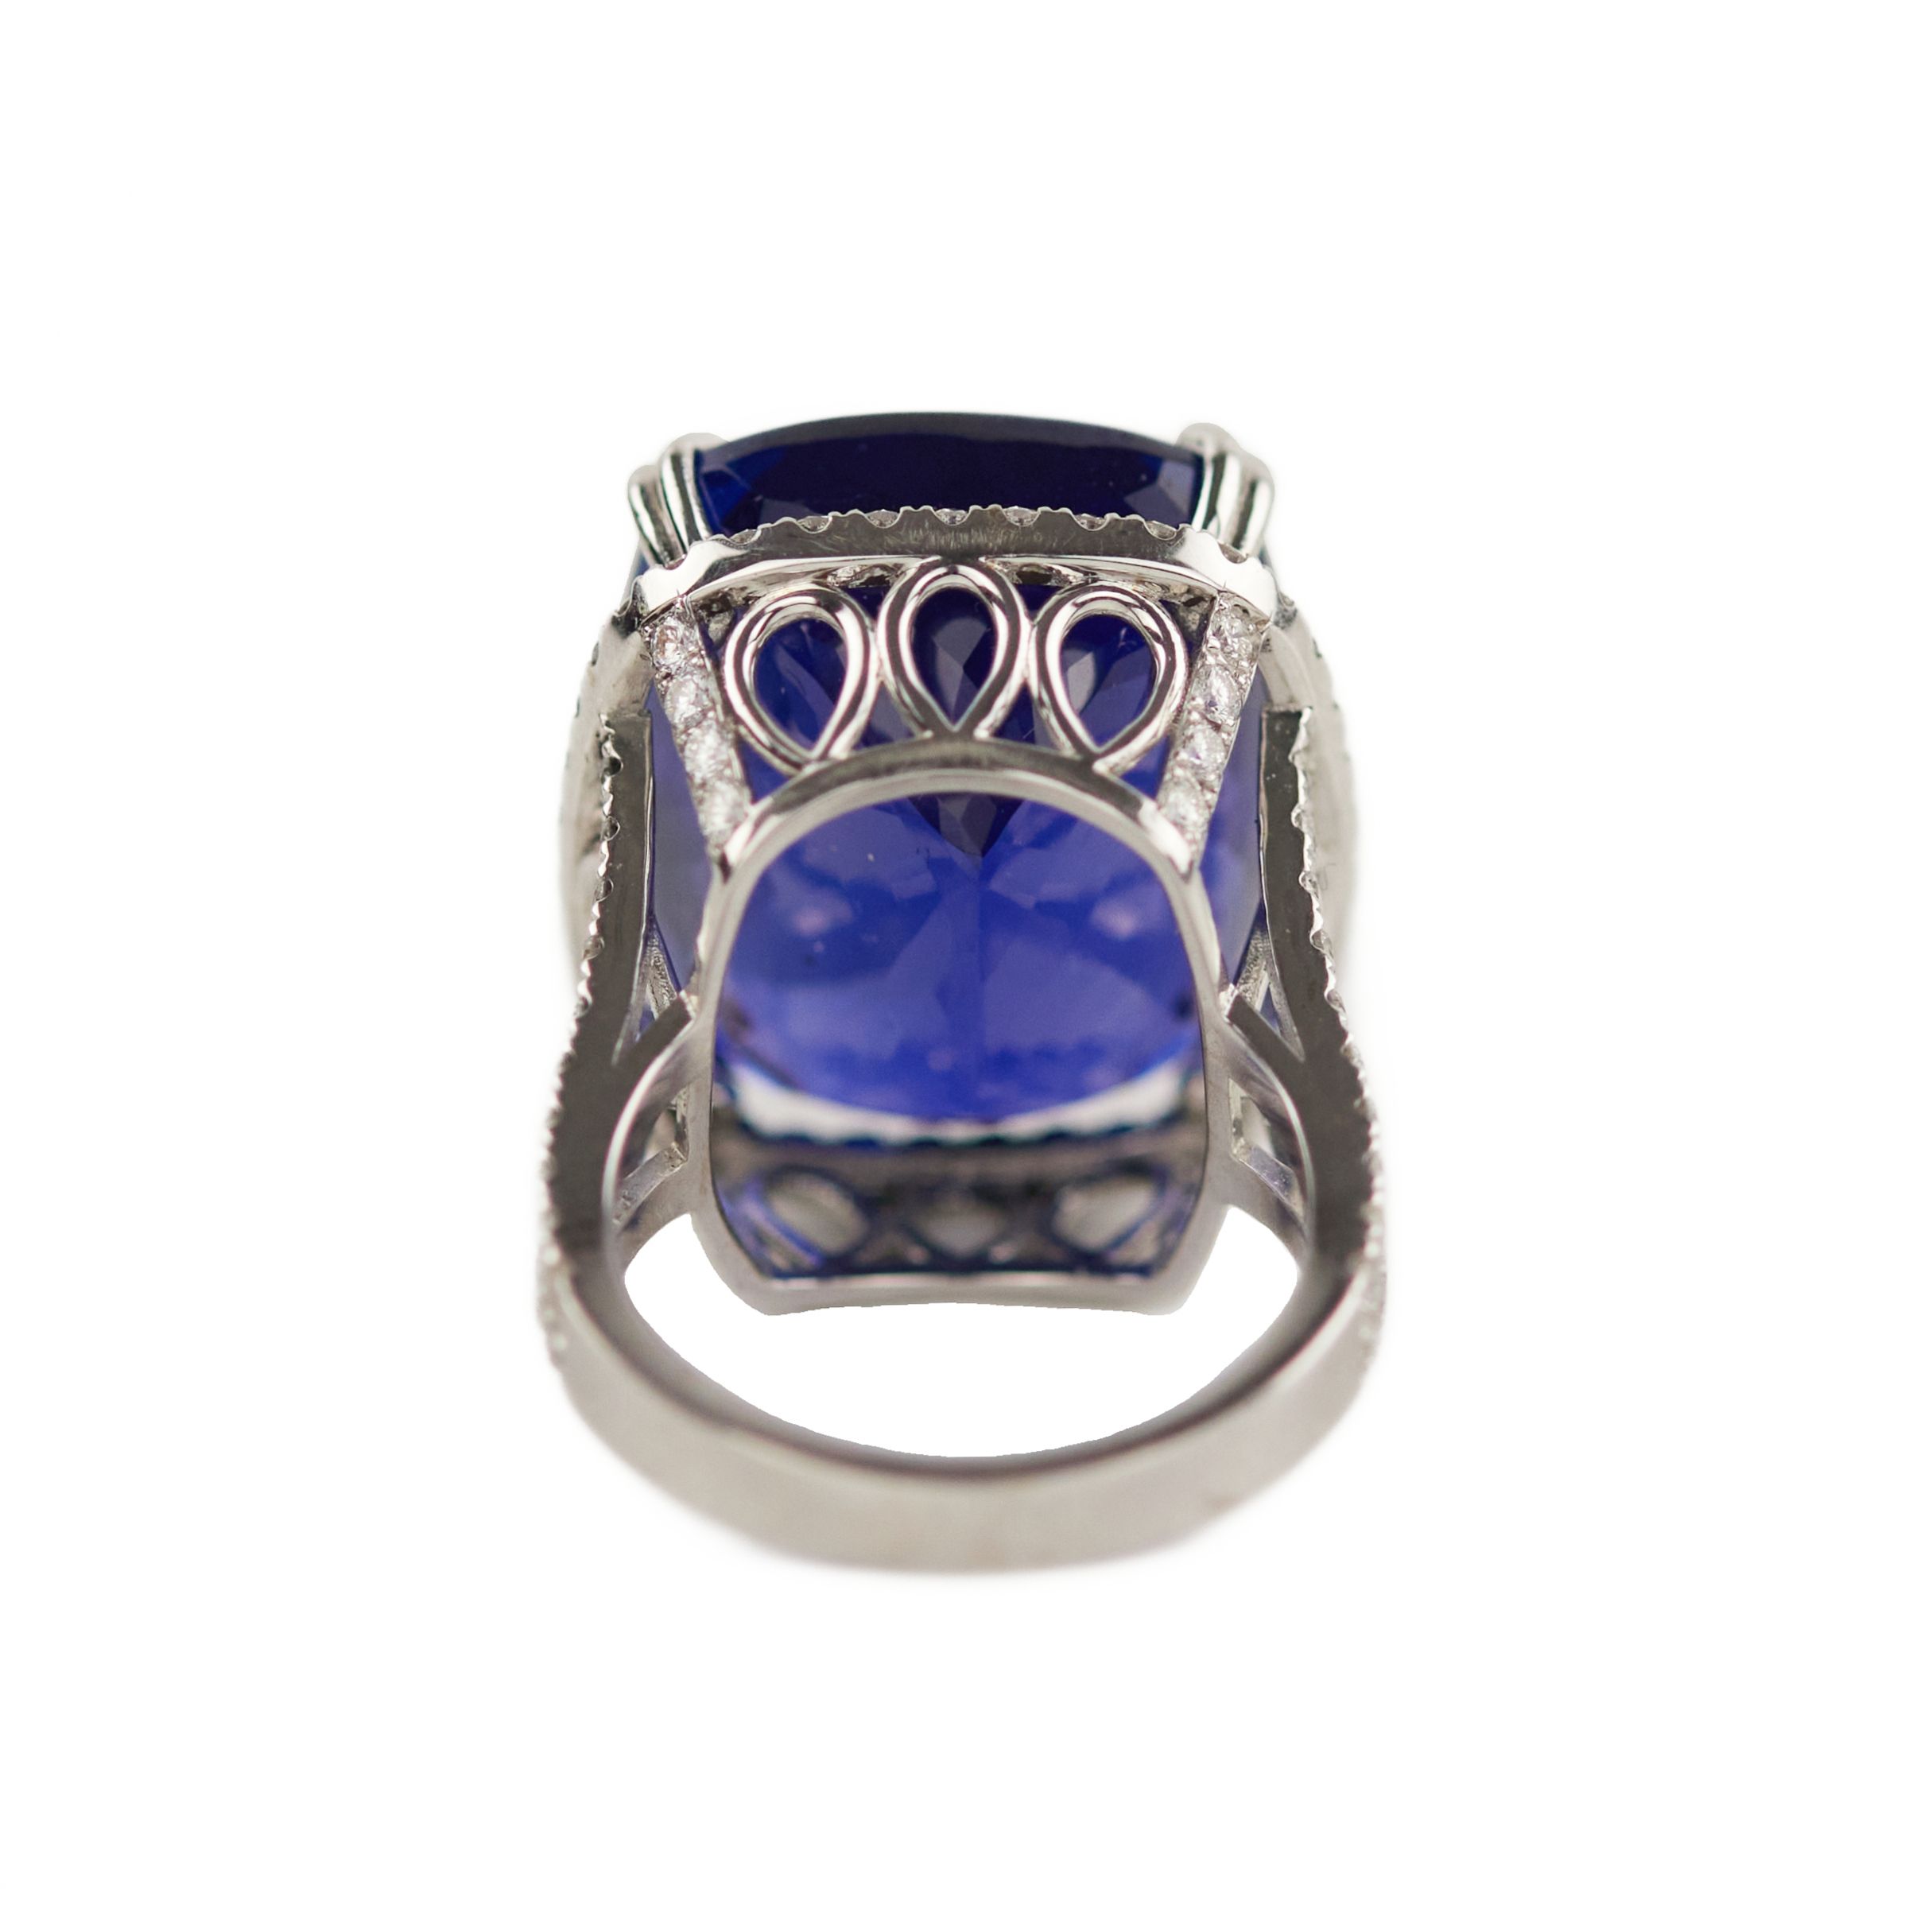 Gold ring with tanzanite and diamonds. - Image 4 of 5